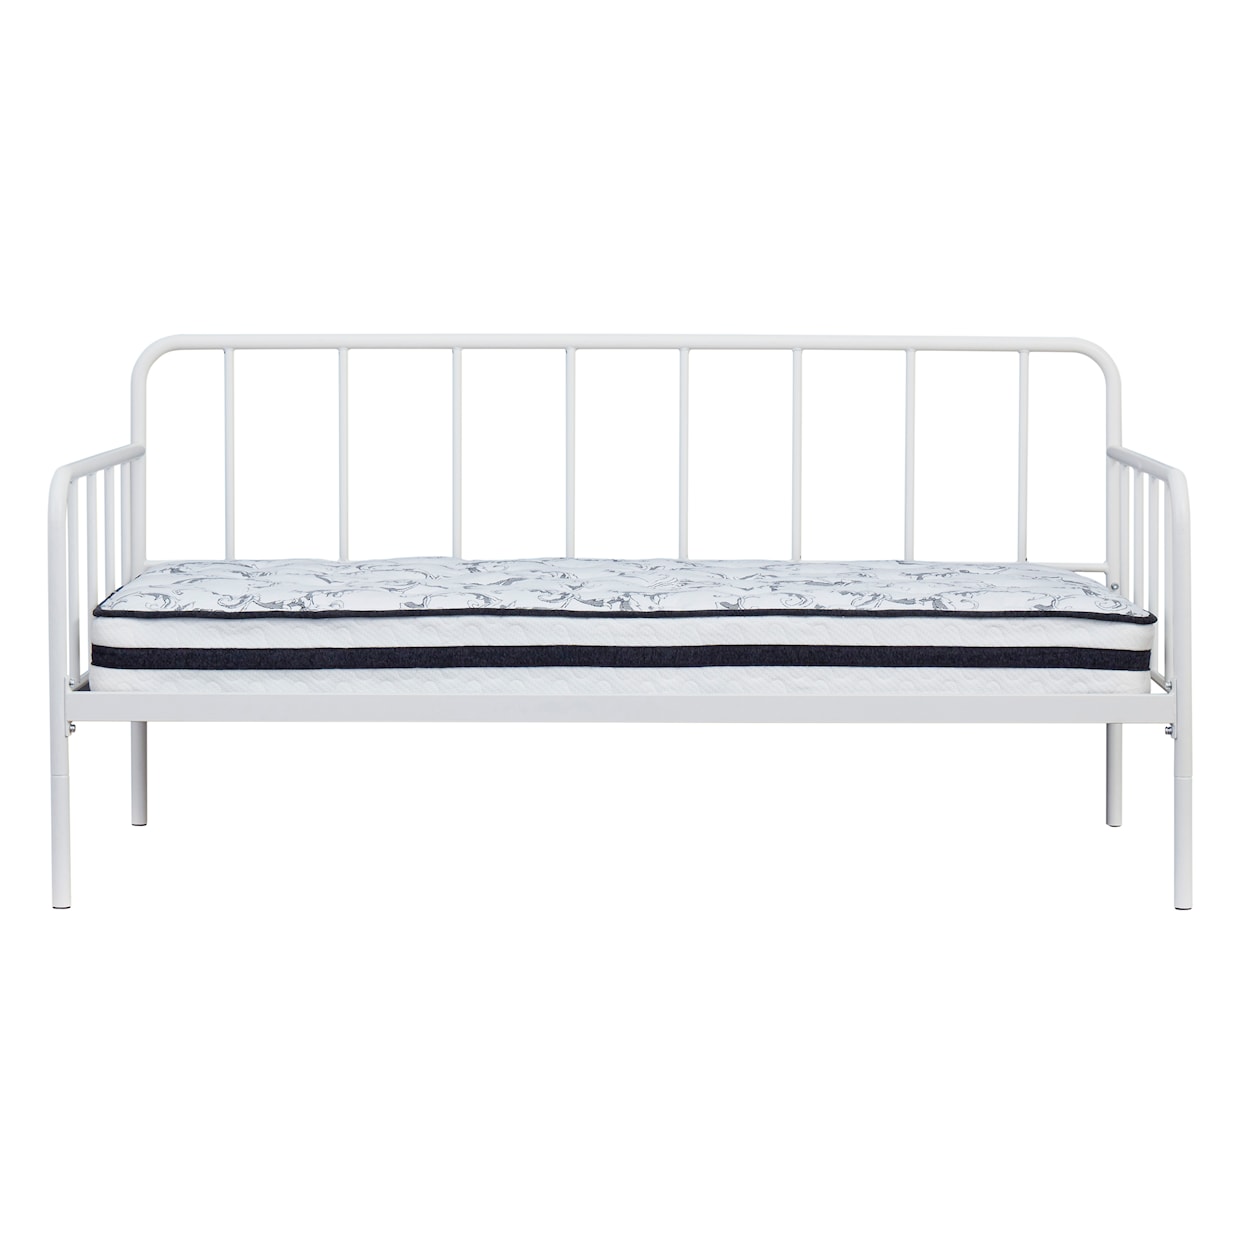 Signature Design by Ashley Trentlore Day Bed